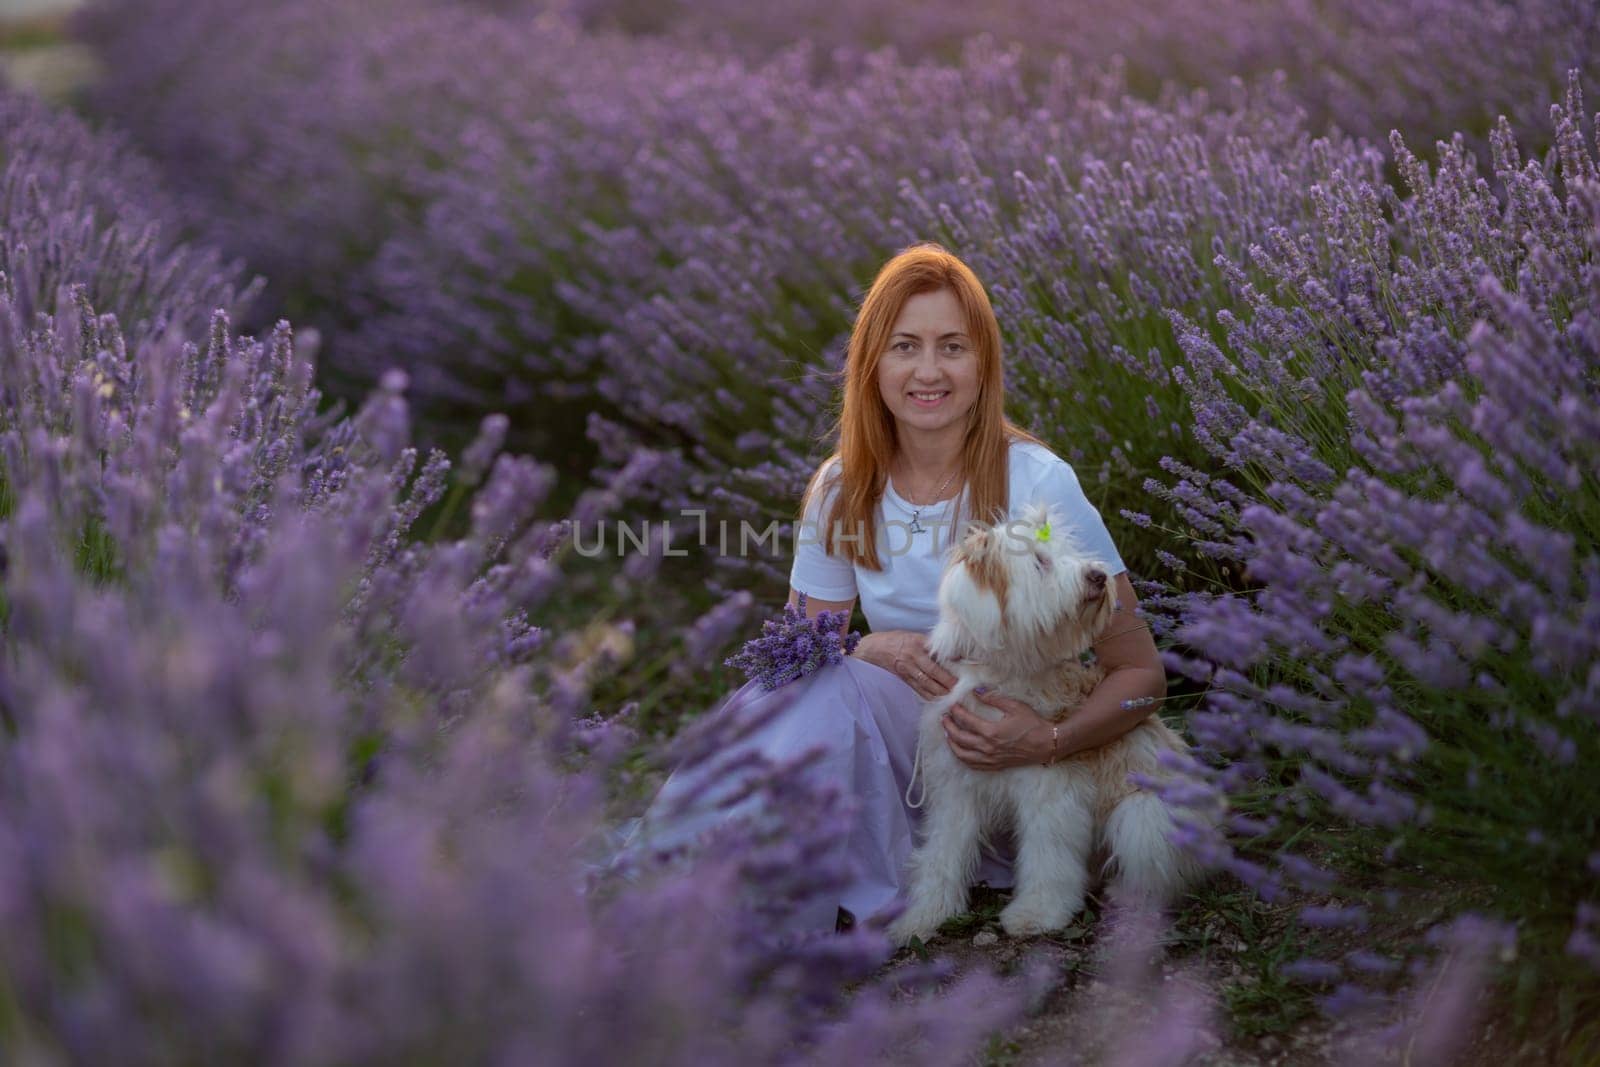 A woman sits in a field of lavender with her dog. The scene is peaceful and serene, with the purple flowers surrounding them